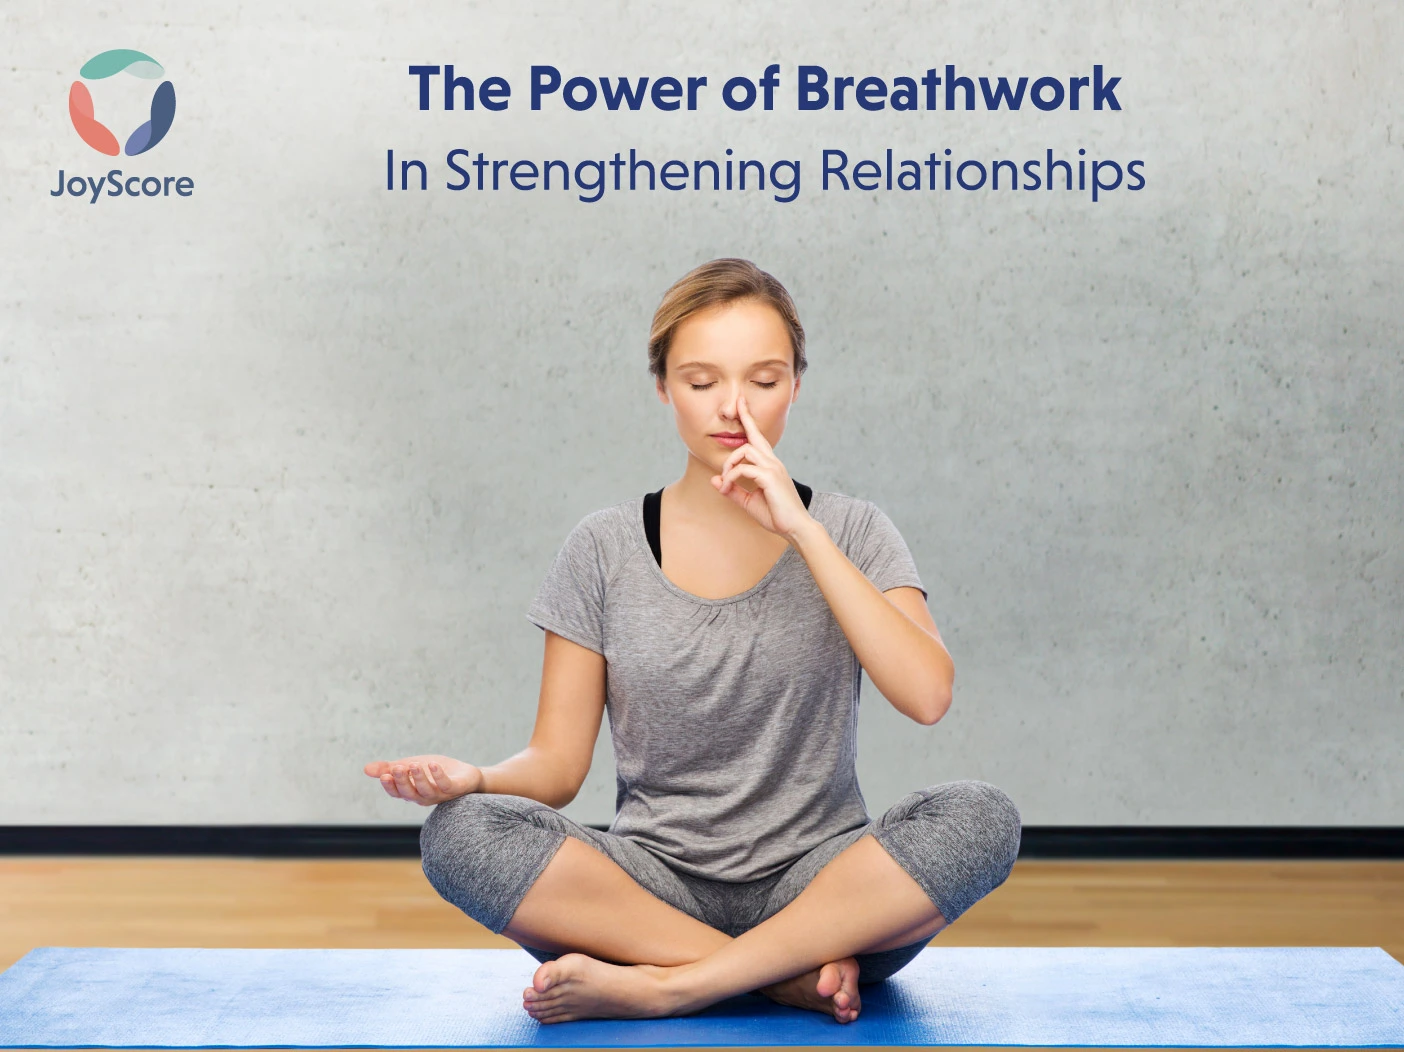 The Power of Breathwork How Breathing Exercises Can Help Strengthen Your Relationships